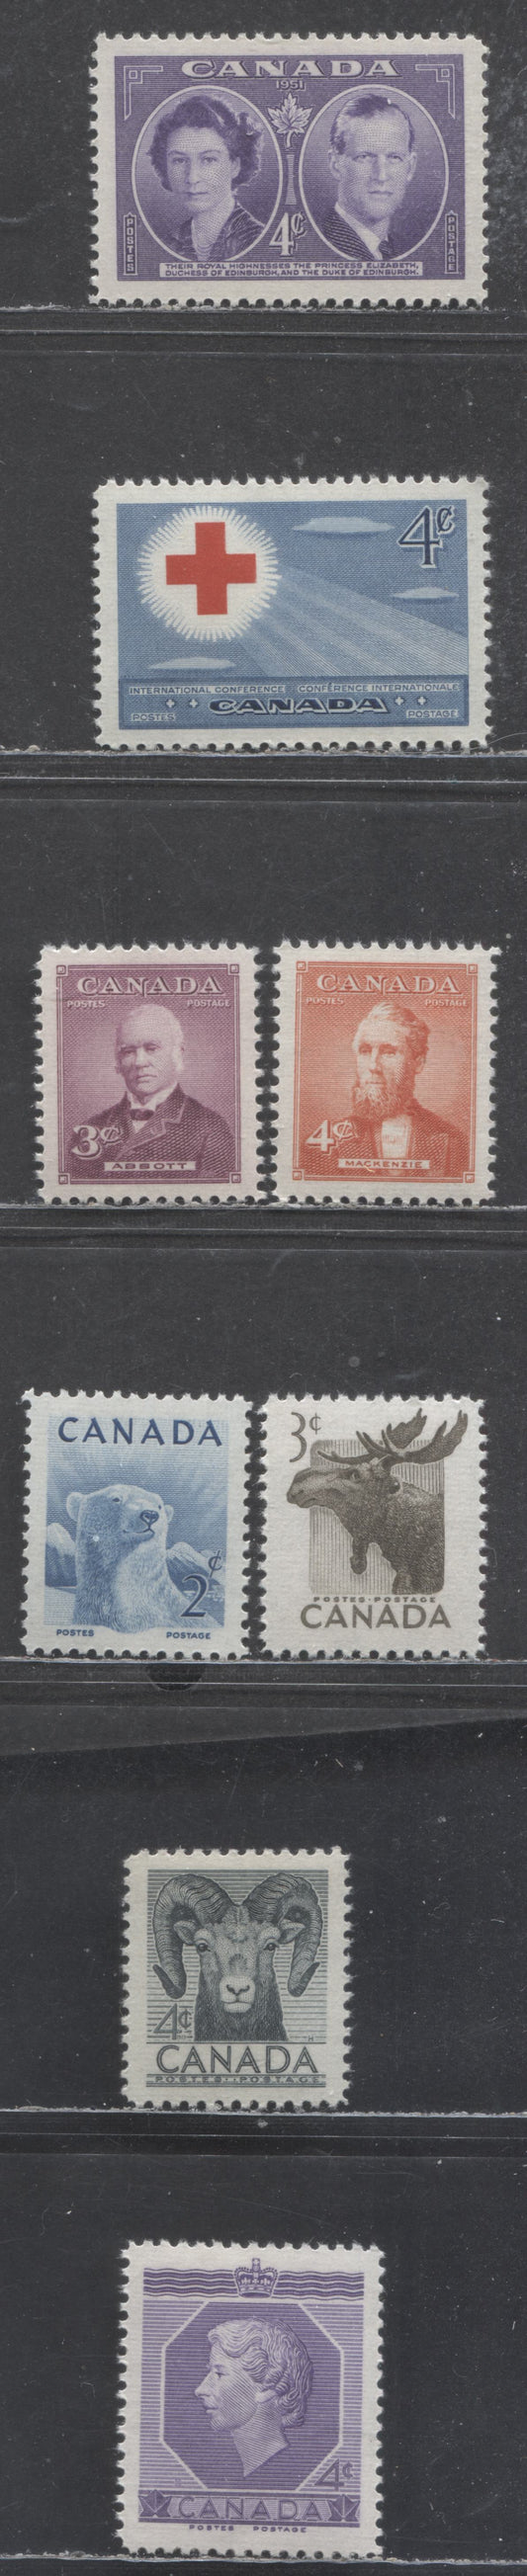 Lot 398 Canada #315, 317-319, 322-324, 330 2c-4c Various Colours Various Subjects, 1951-1953 Royal Visit Issue - 1953 Coronation Issue, 8 VFNH Singles, Horizontally Ribbed Paper, Cream & Yellowish Cream Semi-Gloss Gum All Selected For Centering